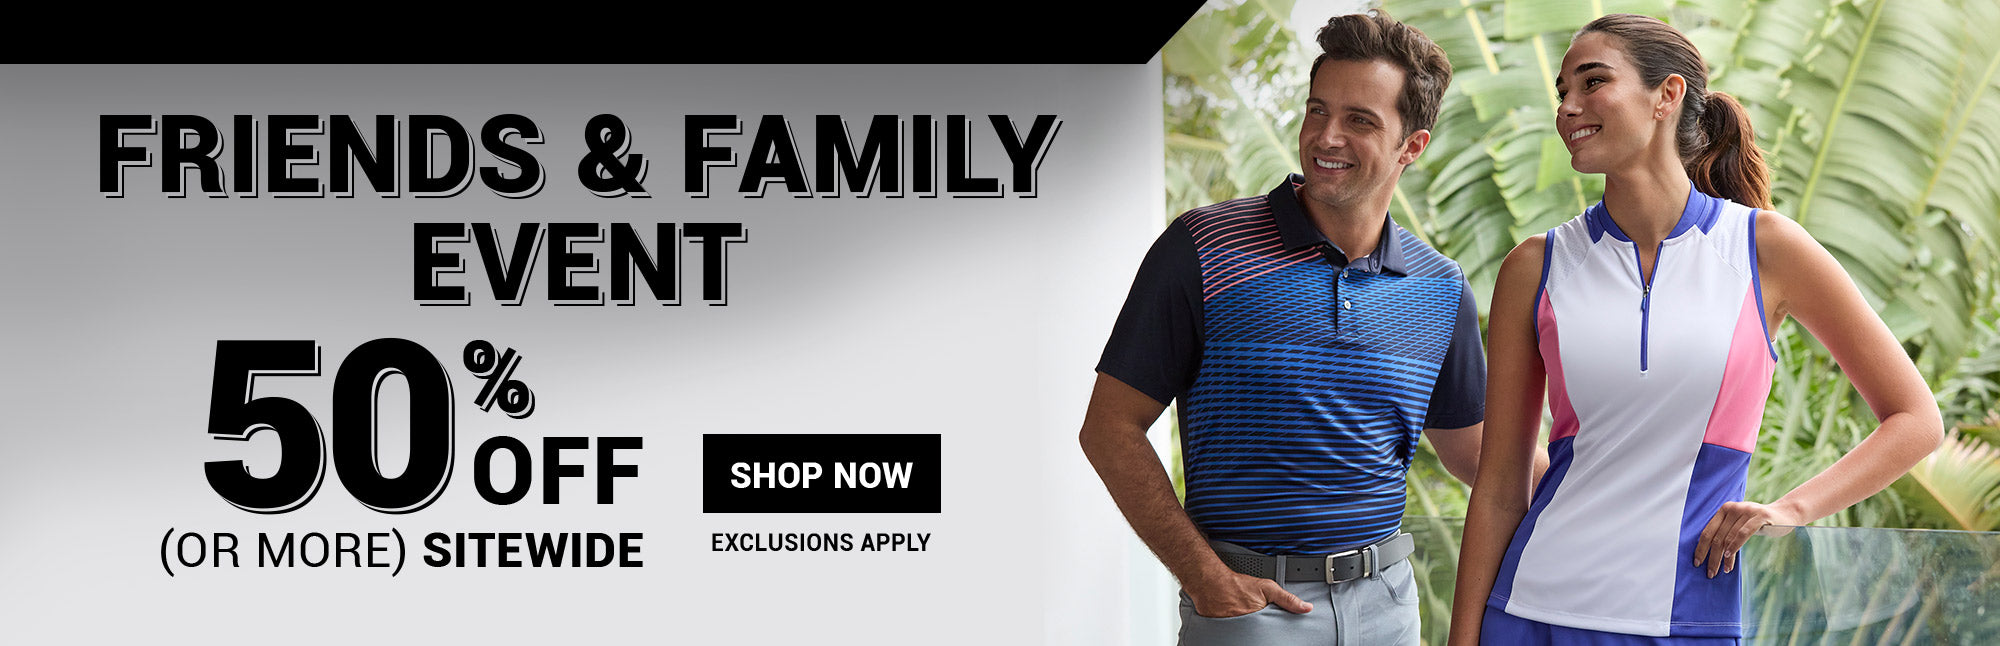 Friends and Family Event | 50% Off (or More) Sitewide - Shop Now